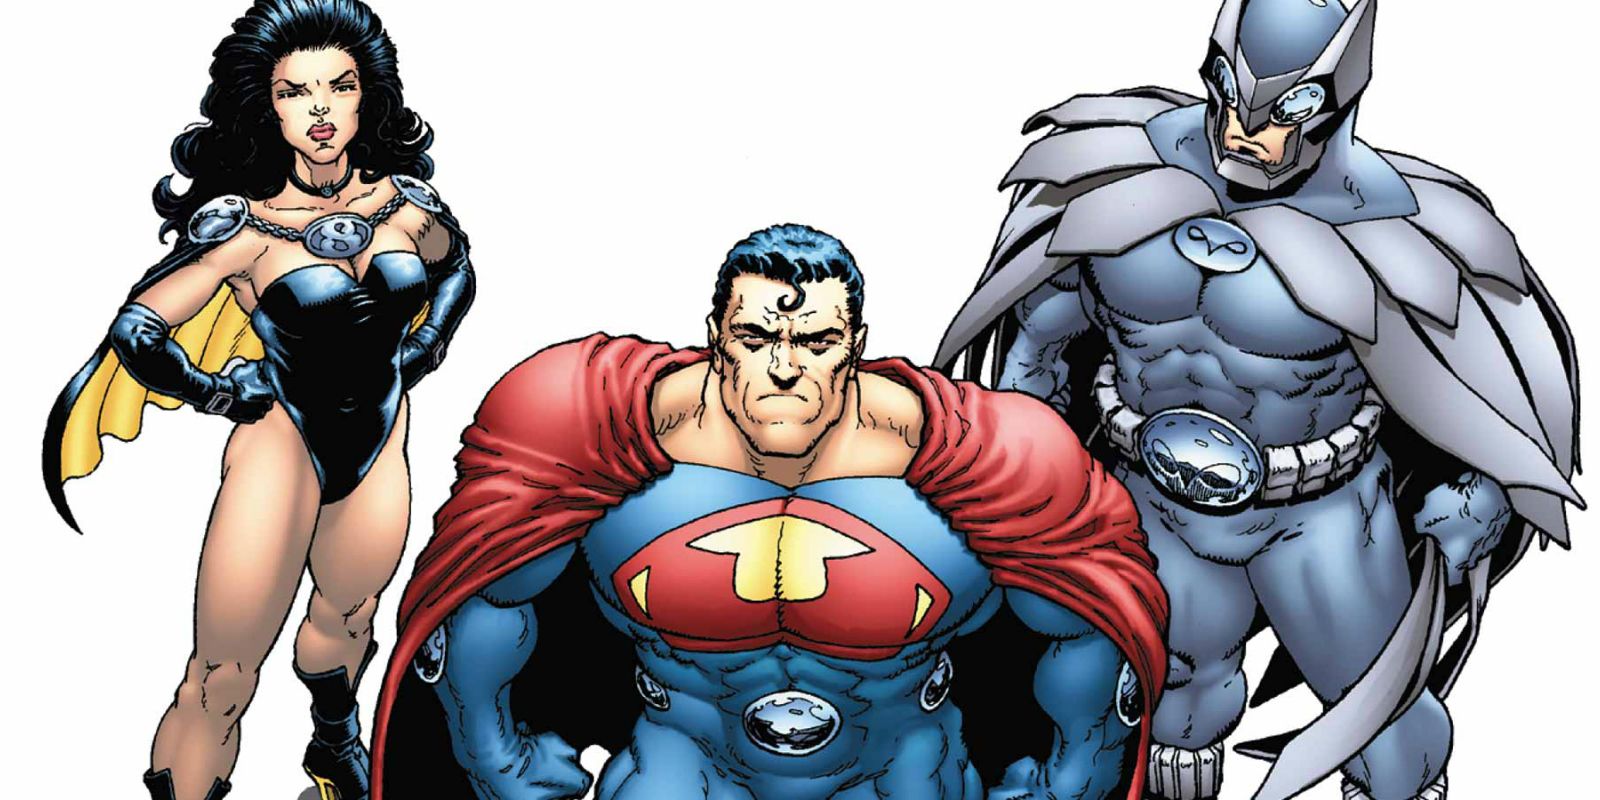 The Crime Syndicate's Superwoman, Ultraman, and Owlman in DC Comics